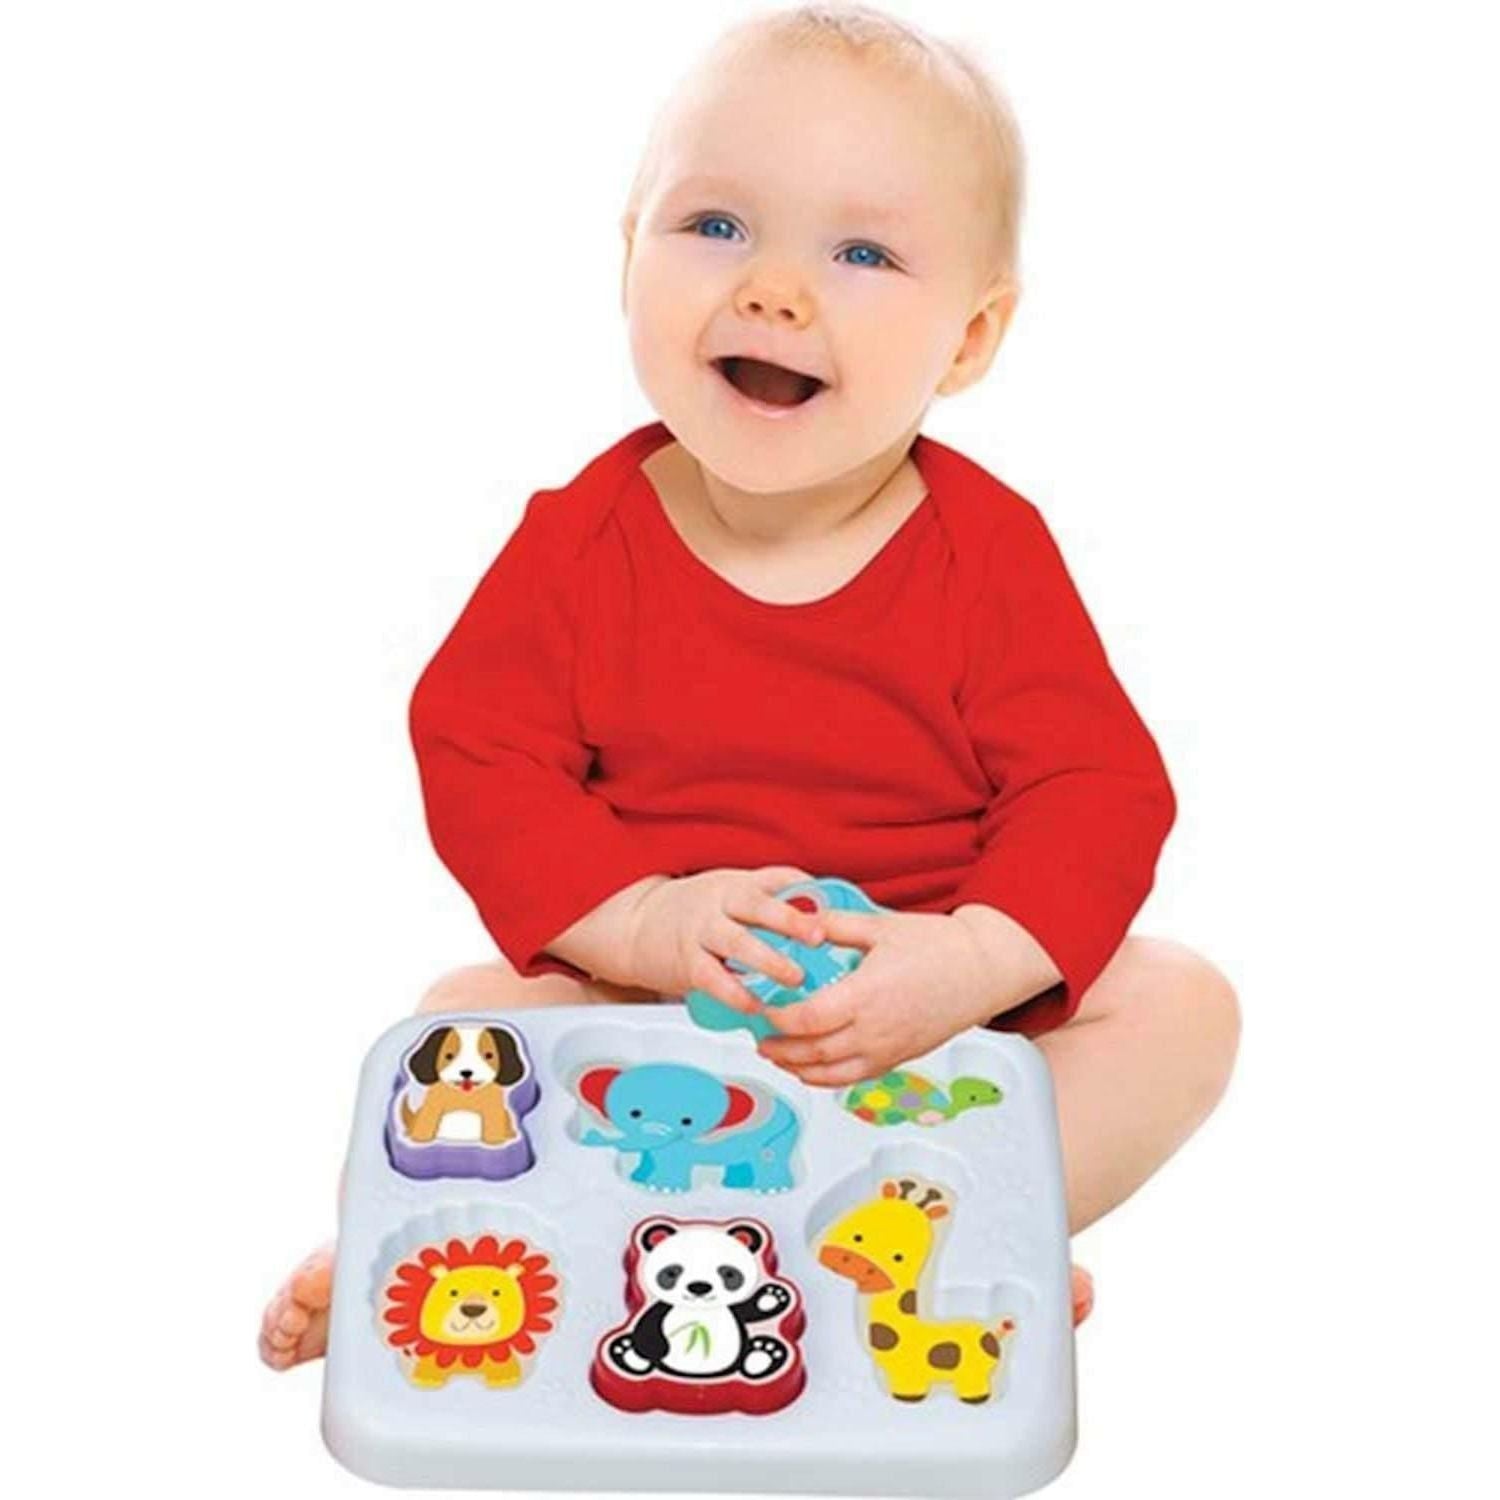 Dede 3431 Shape Sorter Sweet Animals - BumbleToys - 2-4 Years, Boys, Cecil, Girls, Learning Toys